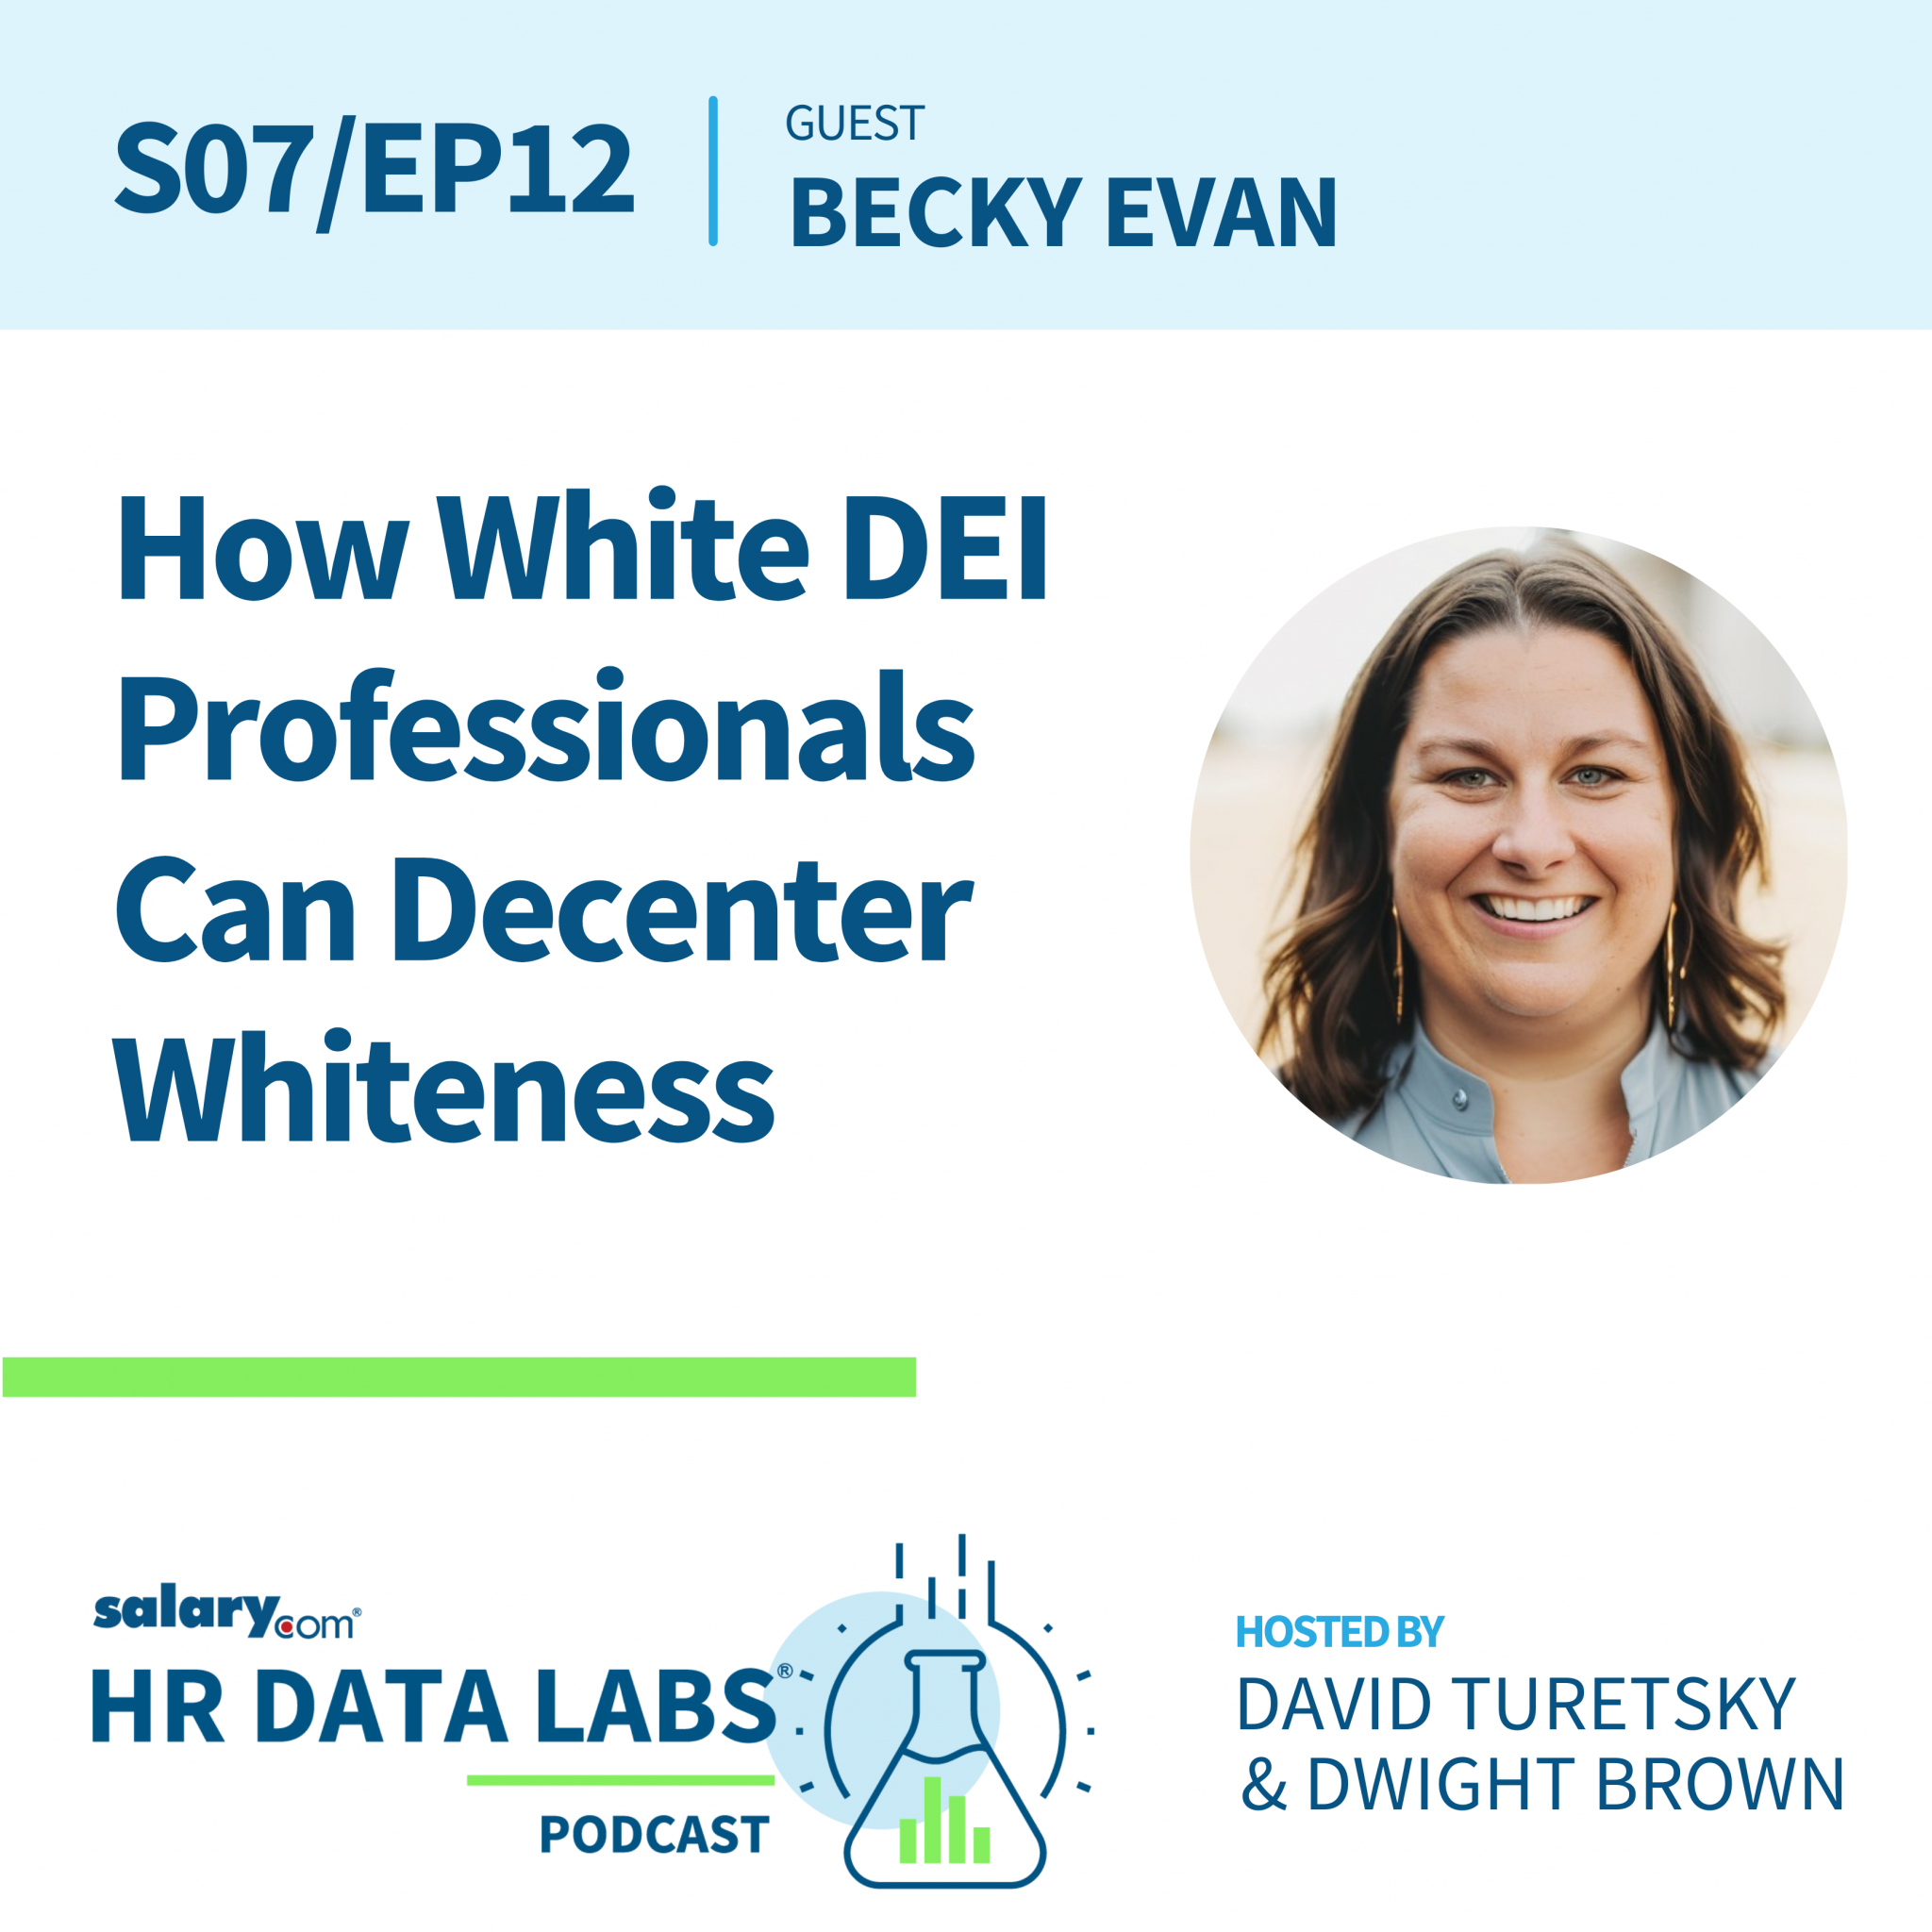 Becky Evan – How White DEI Professionals Can Decenter Whiteness